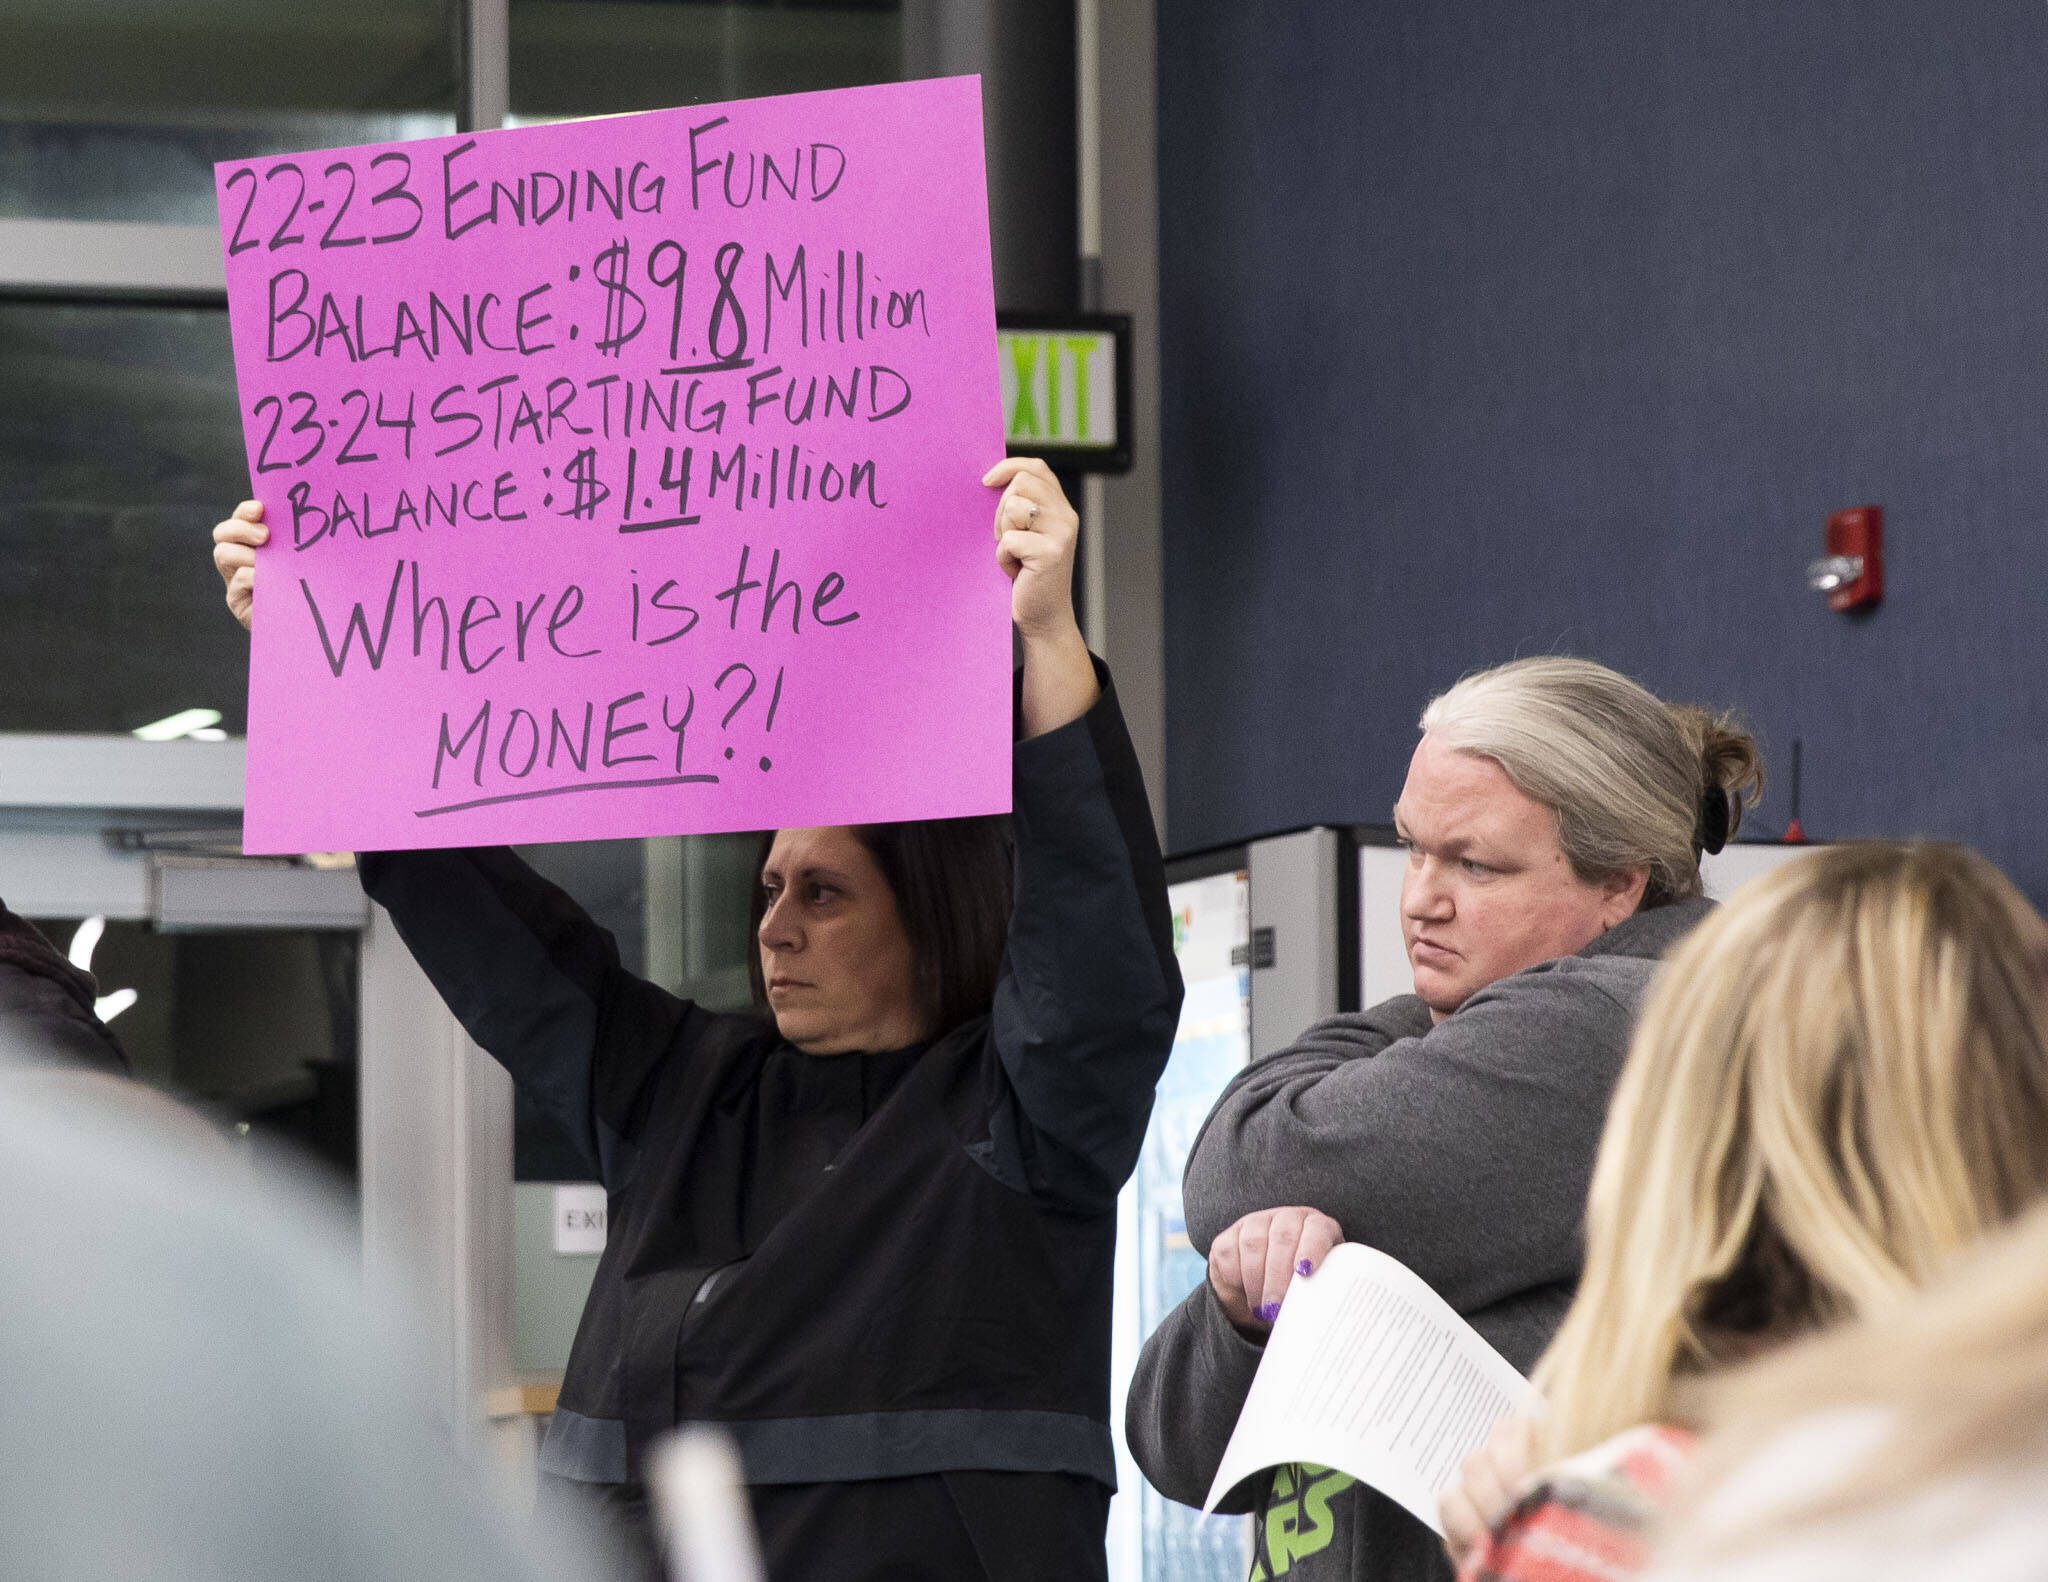 Jalleh Hooman holds up a sign in protest at the Marysville School District budget presentation on Tuesday, Nov. 28, 2023 in Marysville, Washington. (Olivia Vanni / The Herald)